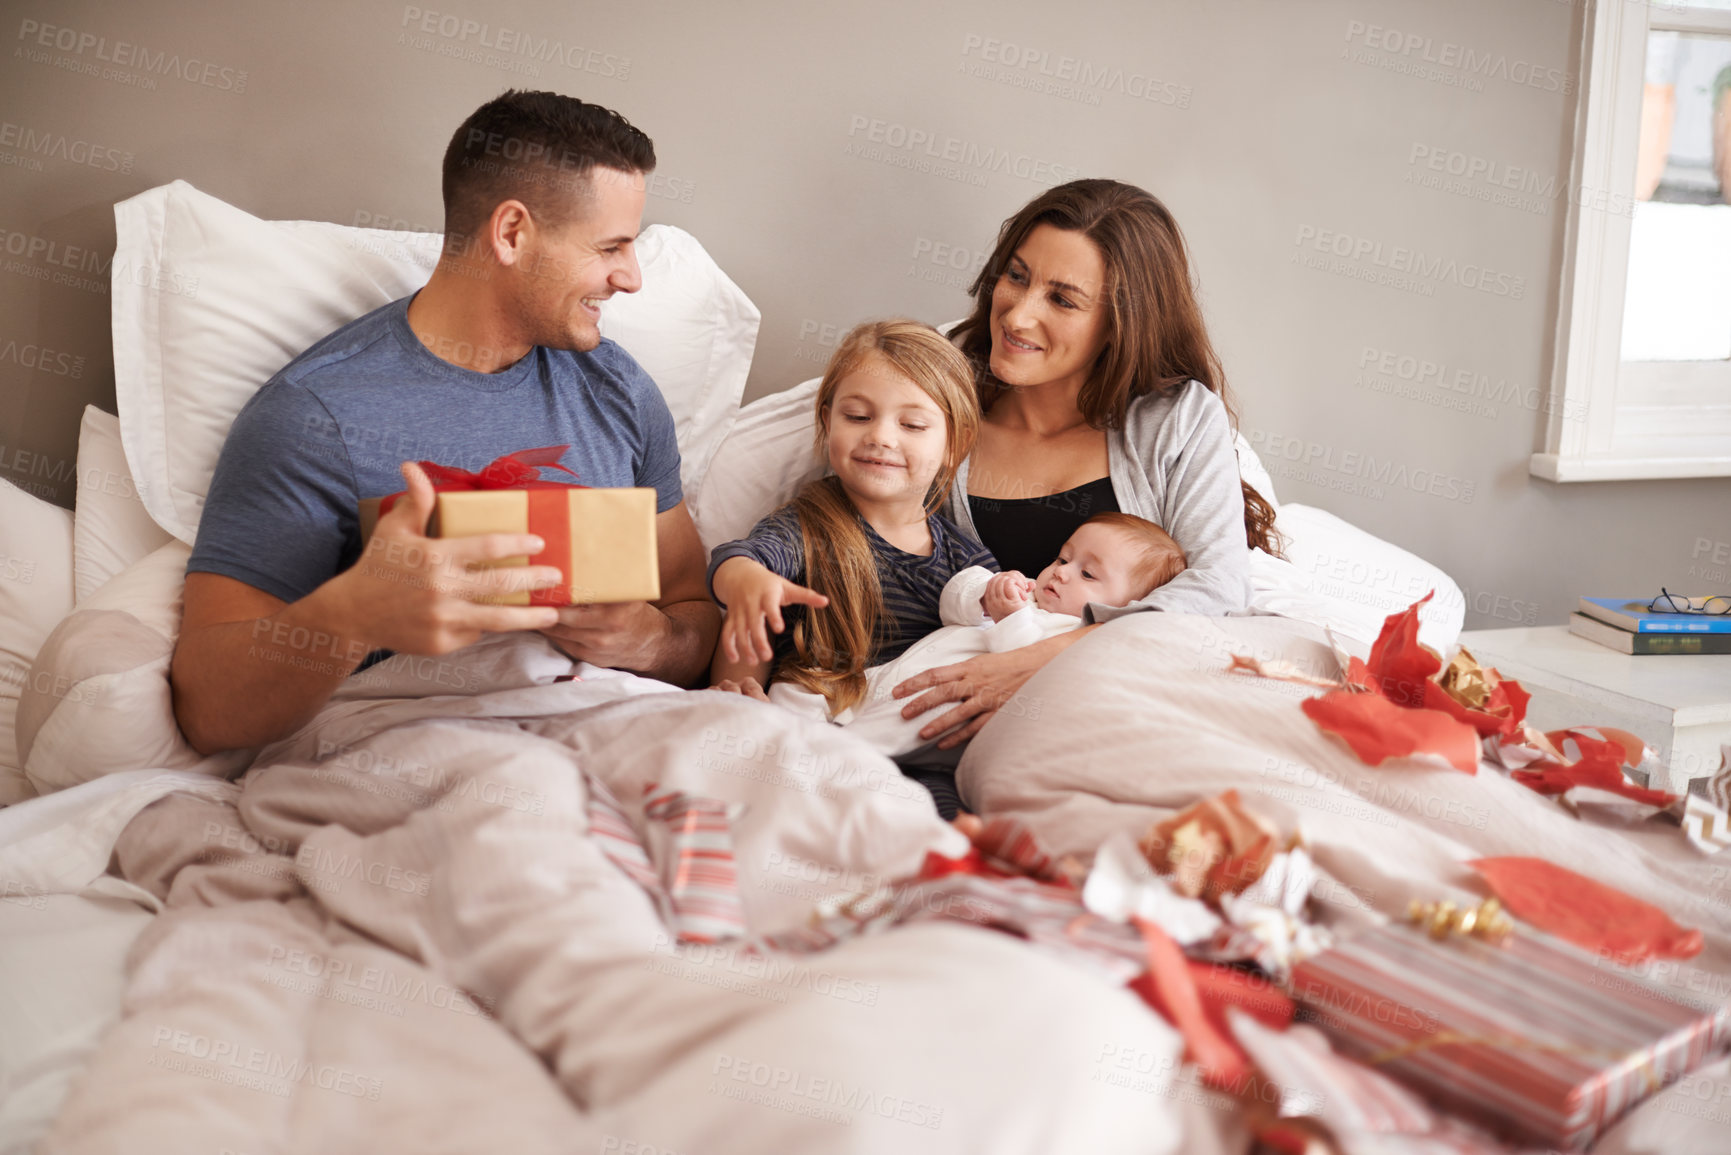 Buy stock photo Bedroom, gift or family with celebration, Christmas or bonding together with happiness, morning or festive season. Parents, mother or father with children, excited or kids with presents, home or Xmas